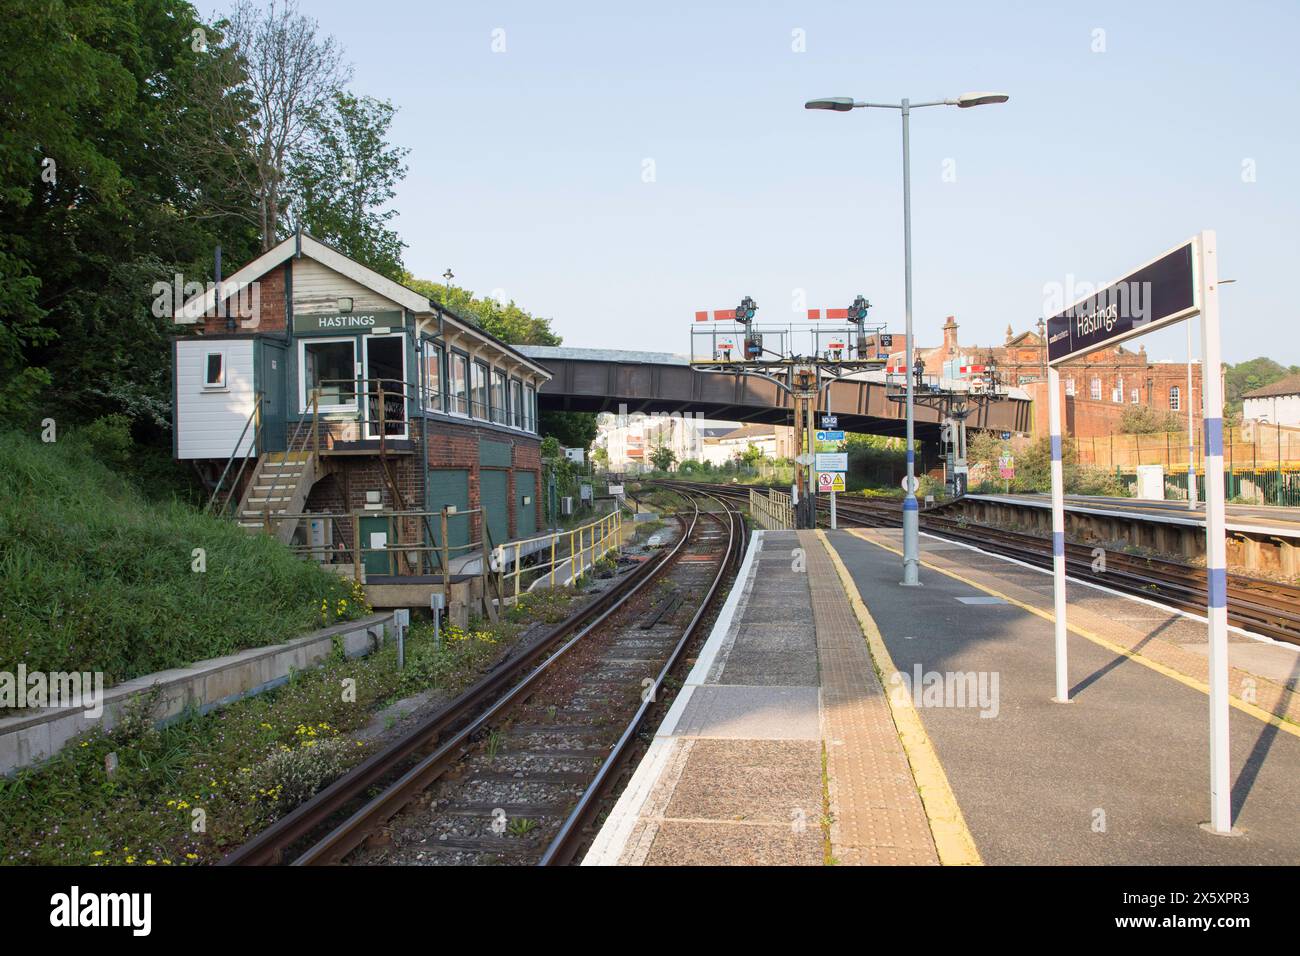 Hastings Station with semaphore signals and signal box Stock Photo